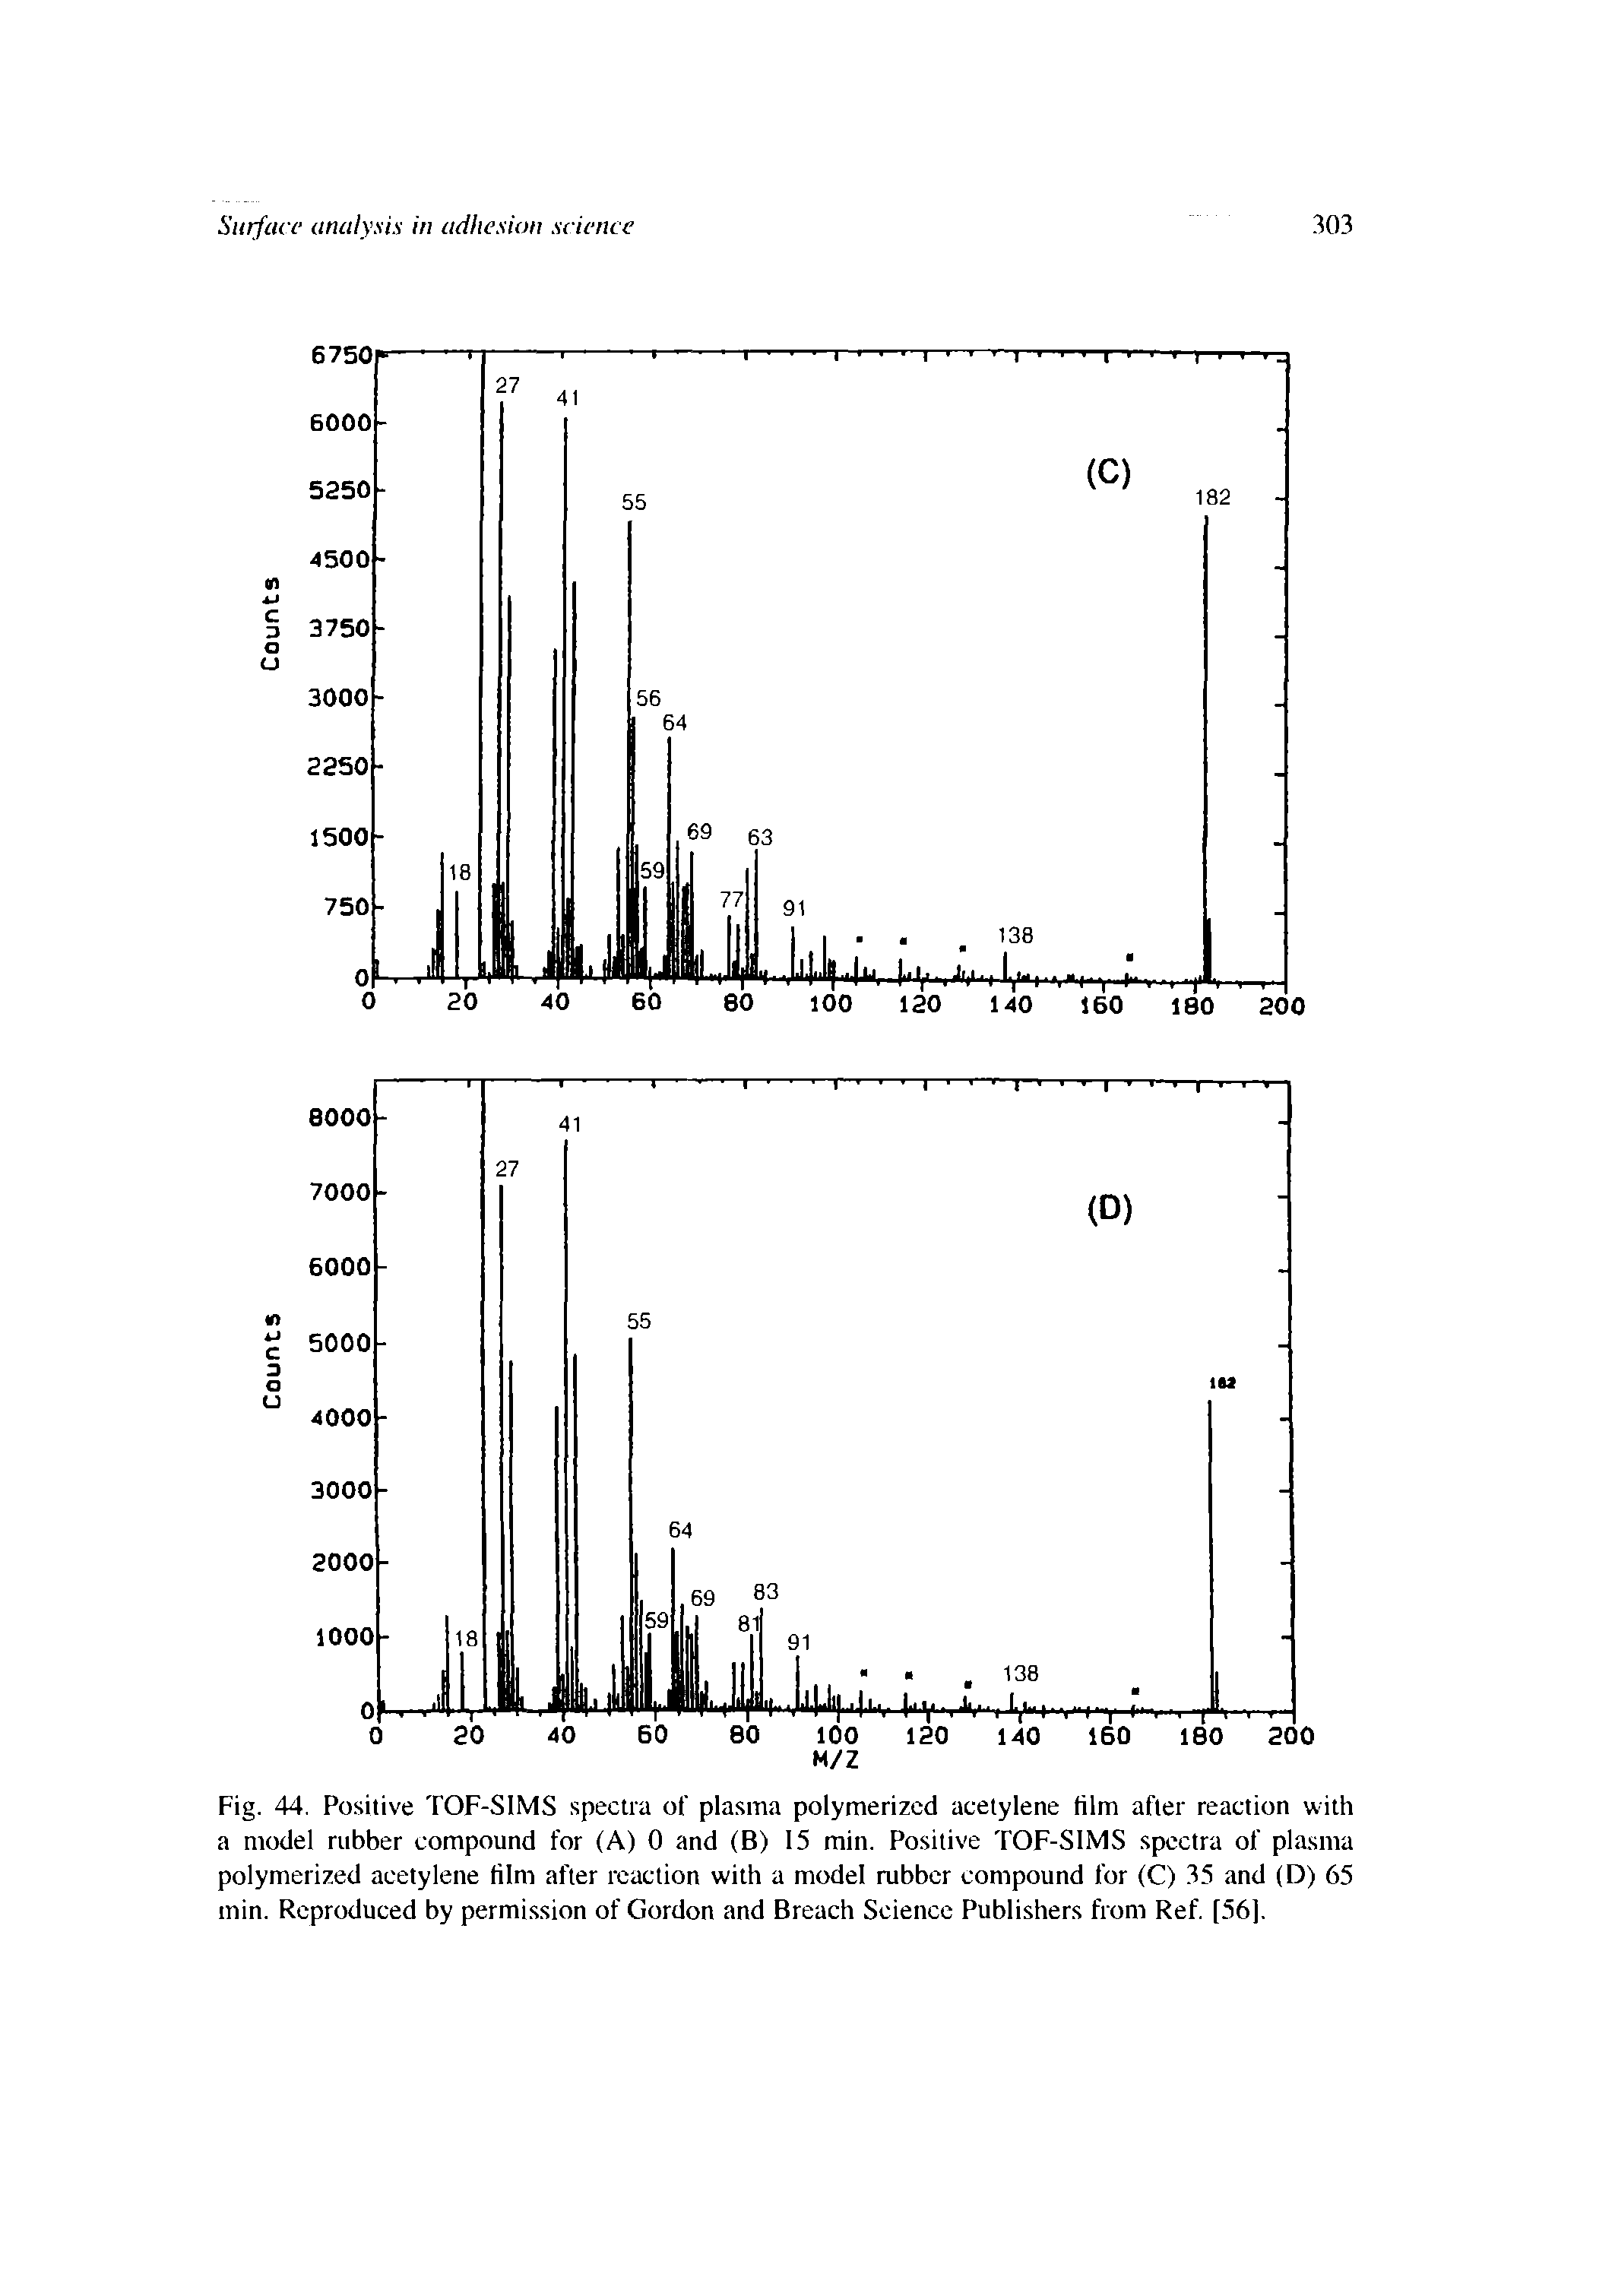 Fig. 44. Positive TOF-SIMS spectra of plasma polymerized acetylene film after reaction with a model rubber compound for (A) 0 and (B) 15 min. Positive TOF-SIMS spectra of plasma polymerized acetylene film after reaction with a model rubber compound for (C) 35 and (D) 65 min. Reproduced by permission of Gordon and Breach Science Publishers from Ref. [56].